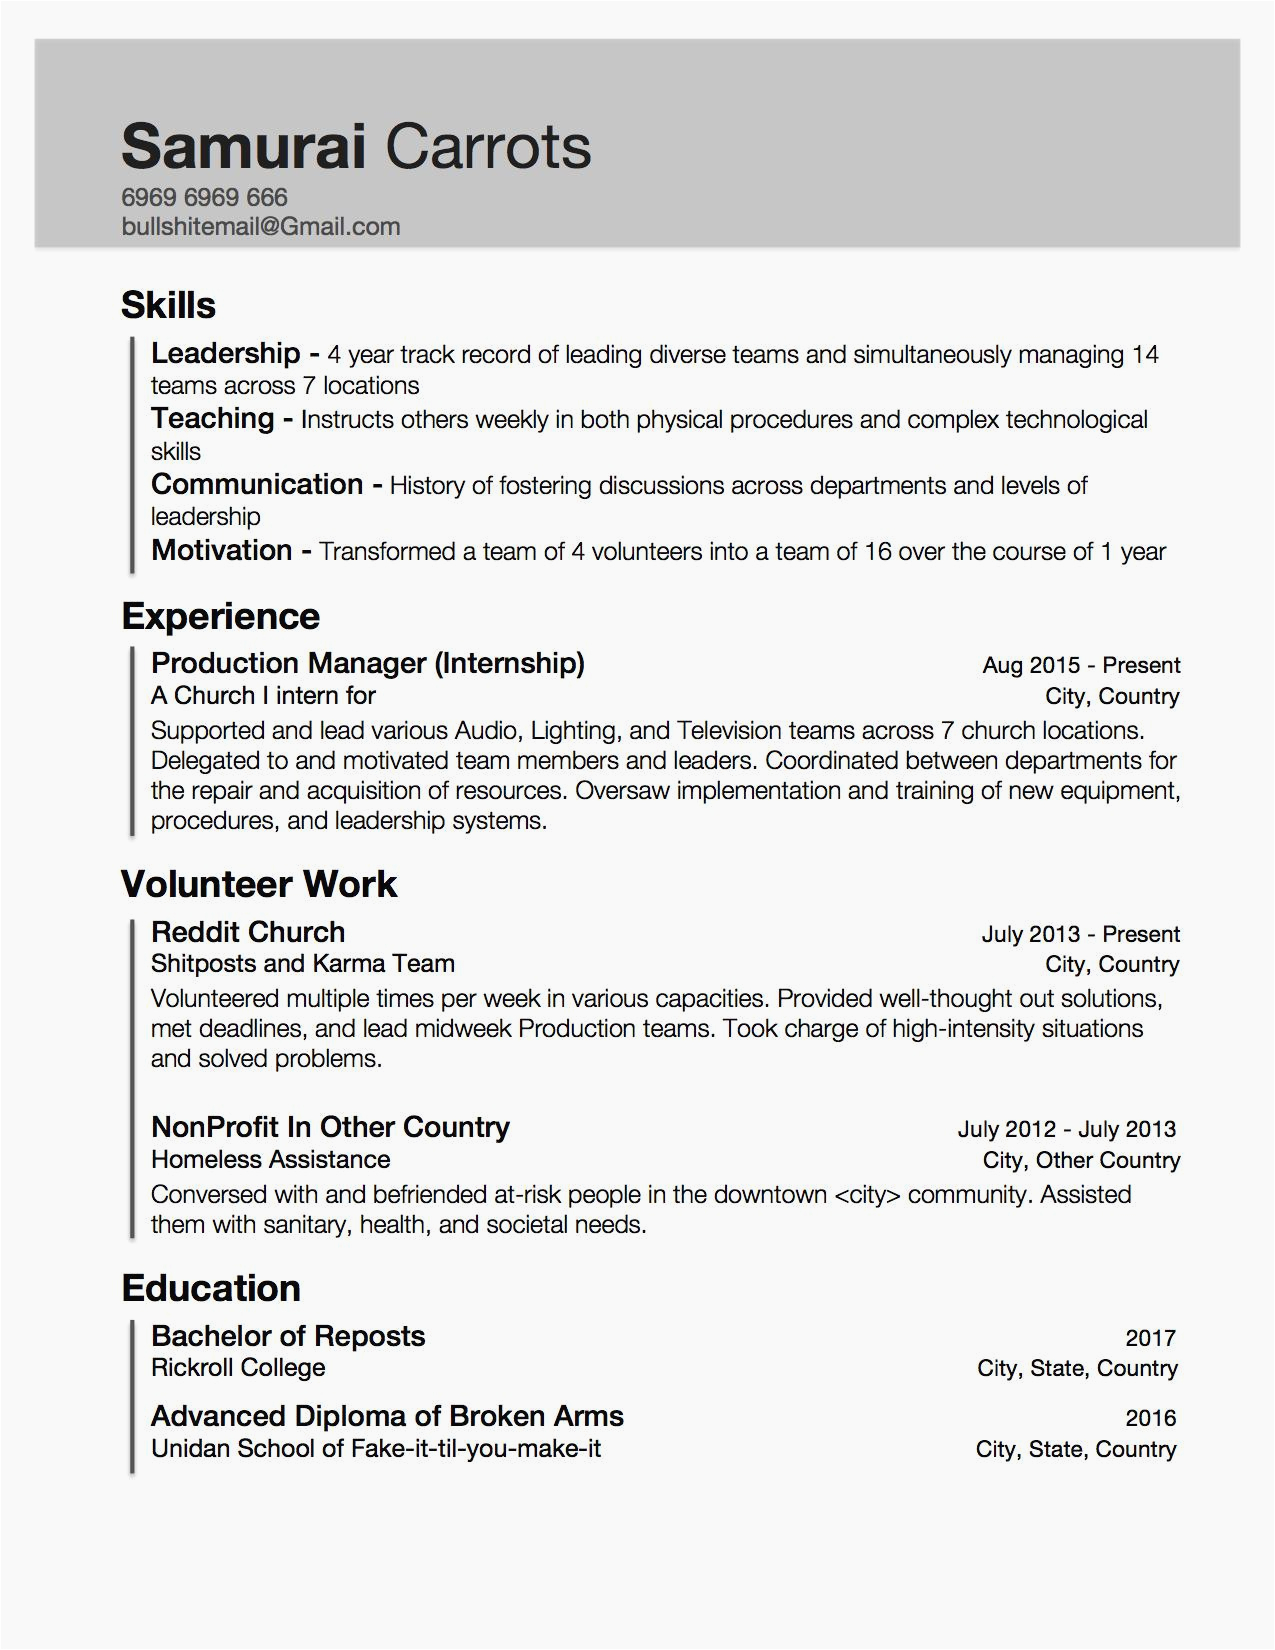 Resume Template for someone with Little Work Experience Resume Samples with Little Work Experience